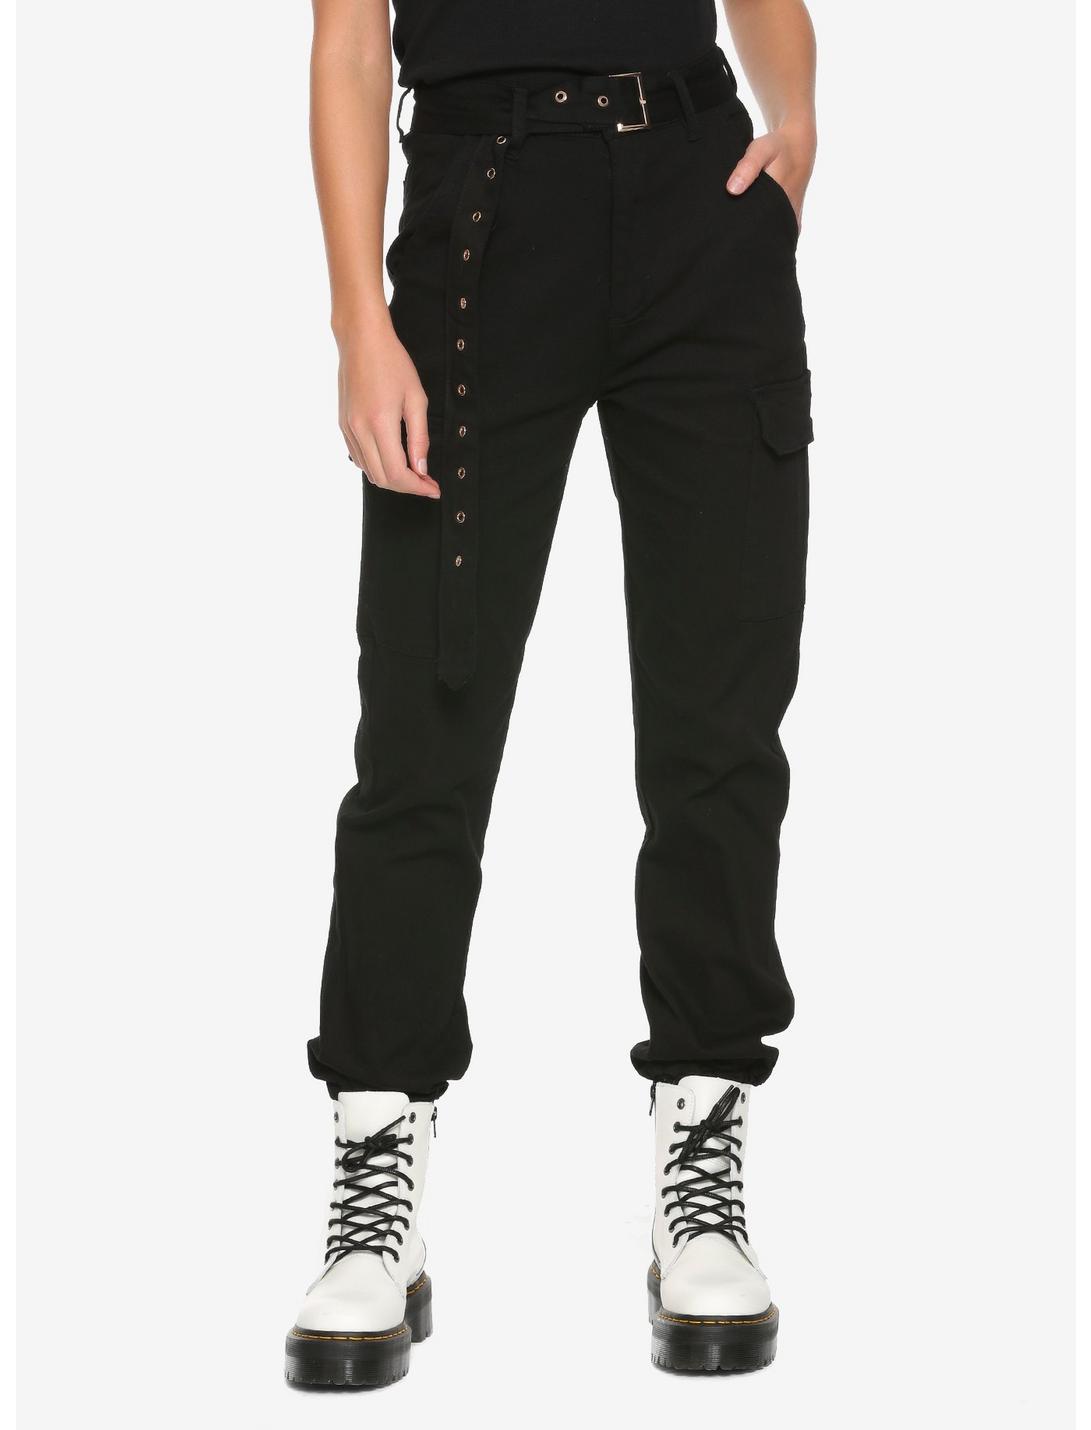 Almost Famous Buckle Cargo Girls Jogger Pants, BLACK, hi-res